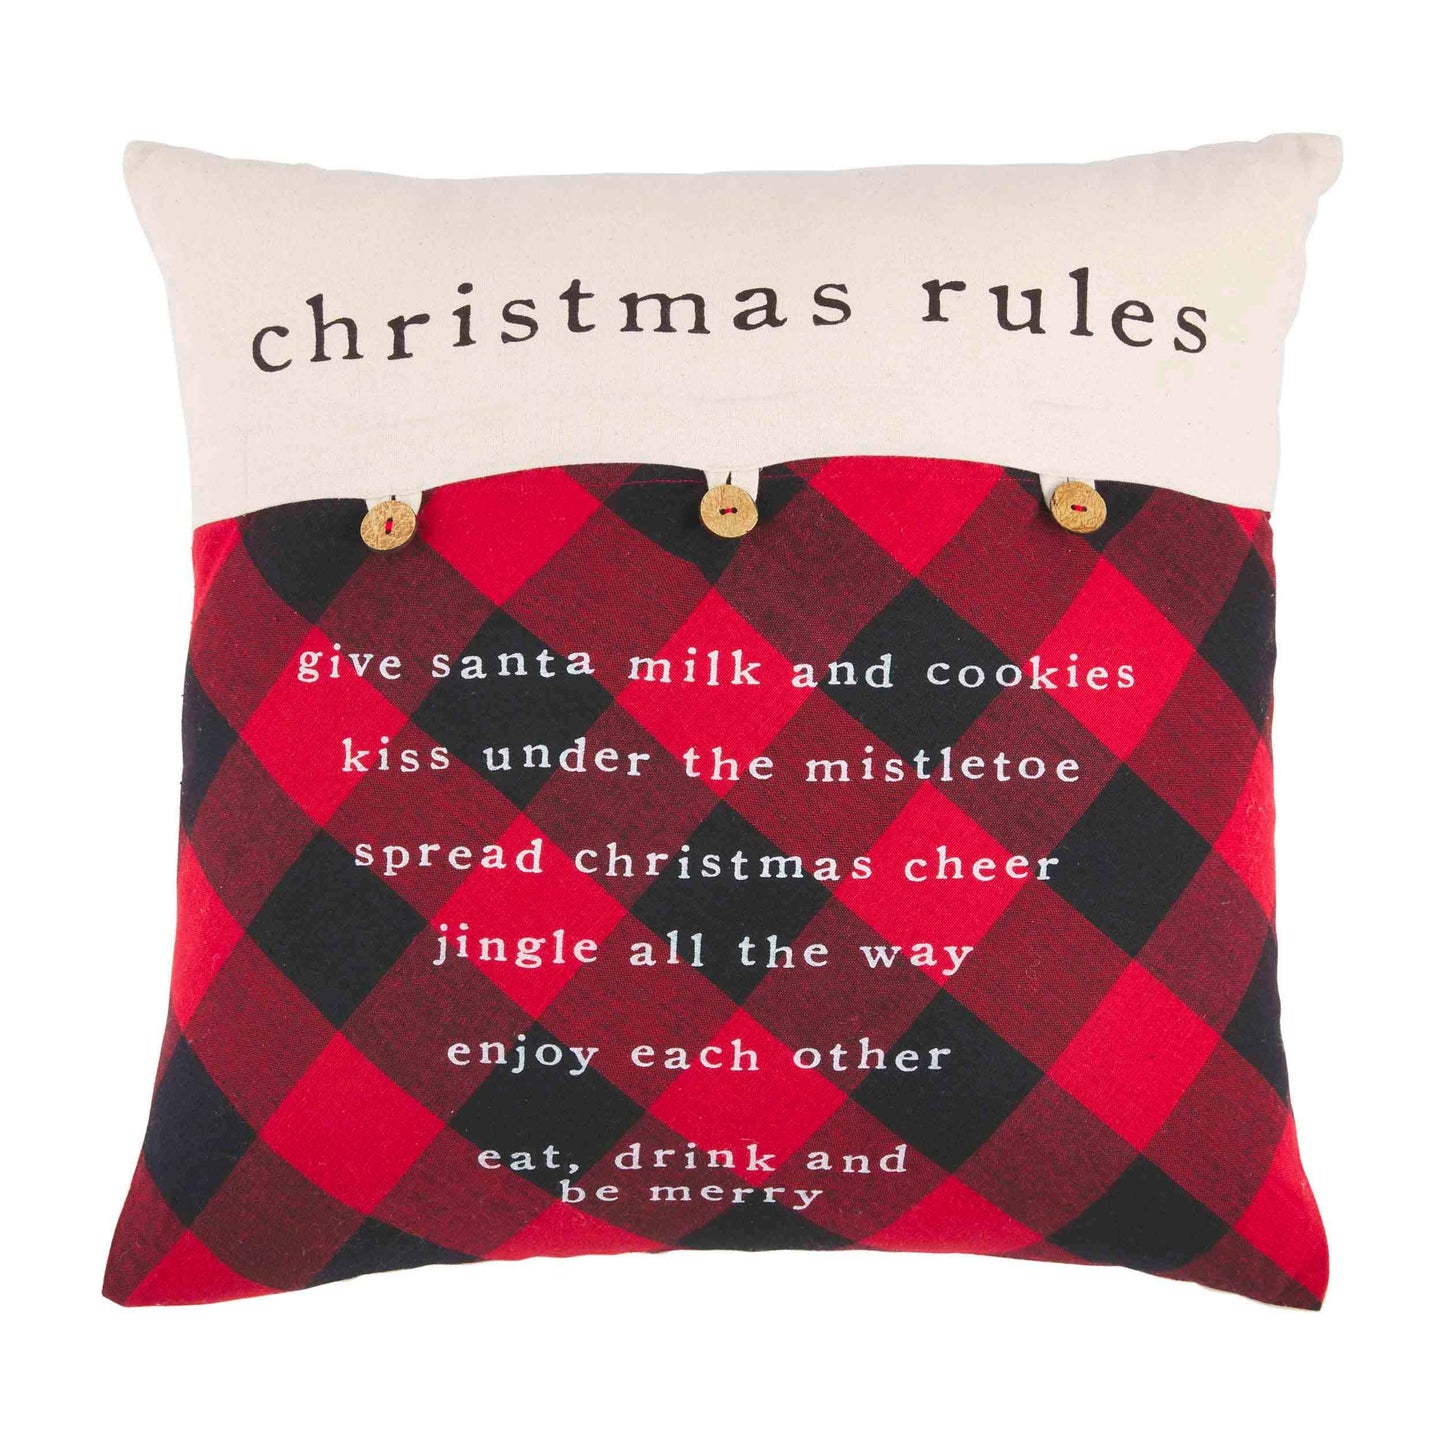 CHRISTMAS RULES BUTTON PILLOW